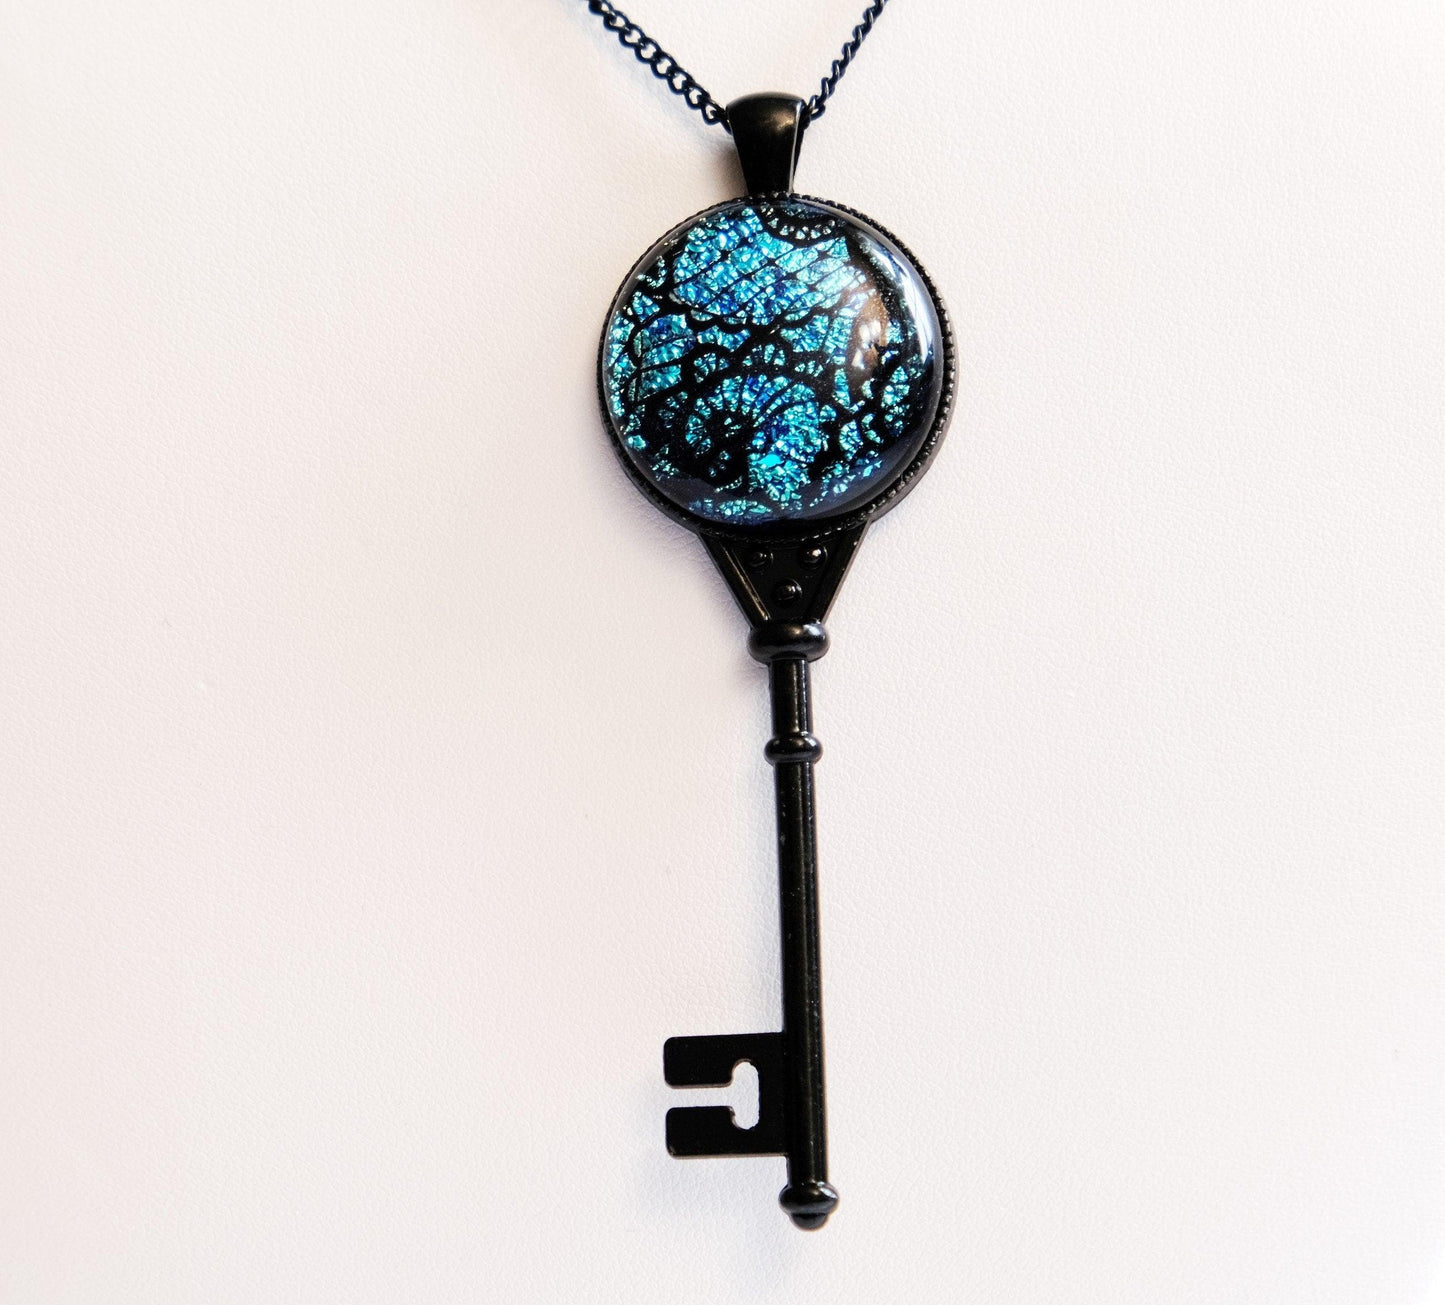 Products Black Metal Skeleton Key pendant necklace with Fused Glass Blue Lace cabochon on 24 inch black chain jewelry seeds glassworks seedsglassworks